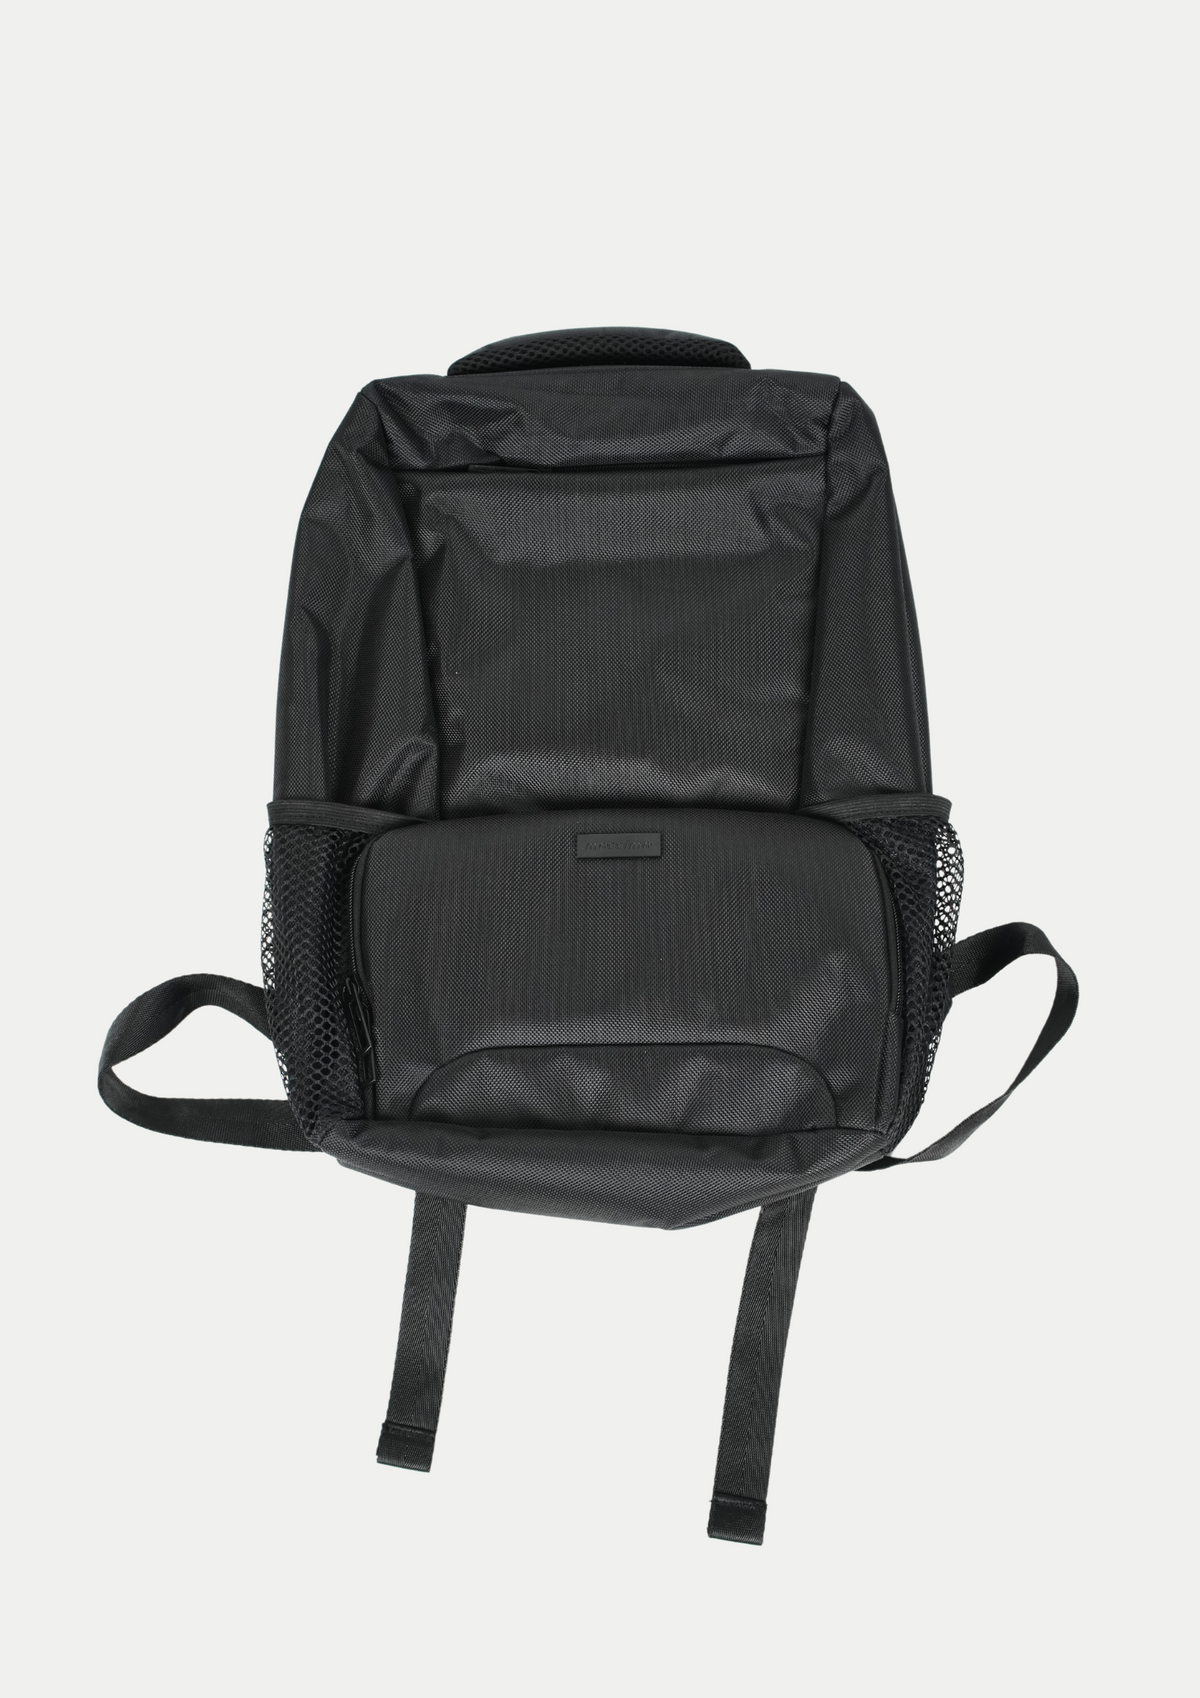 Mossimo Miguel Black Backpack Bag